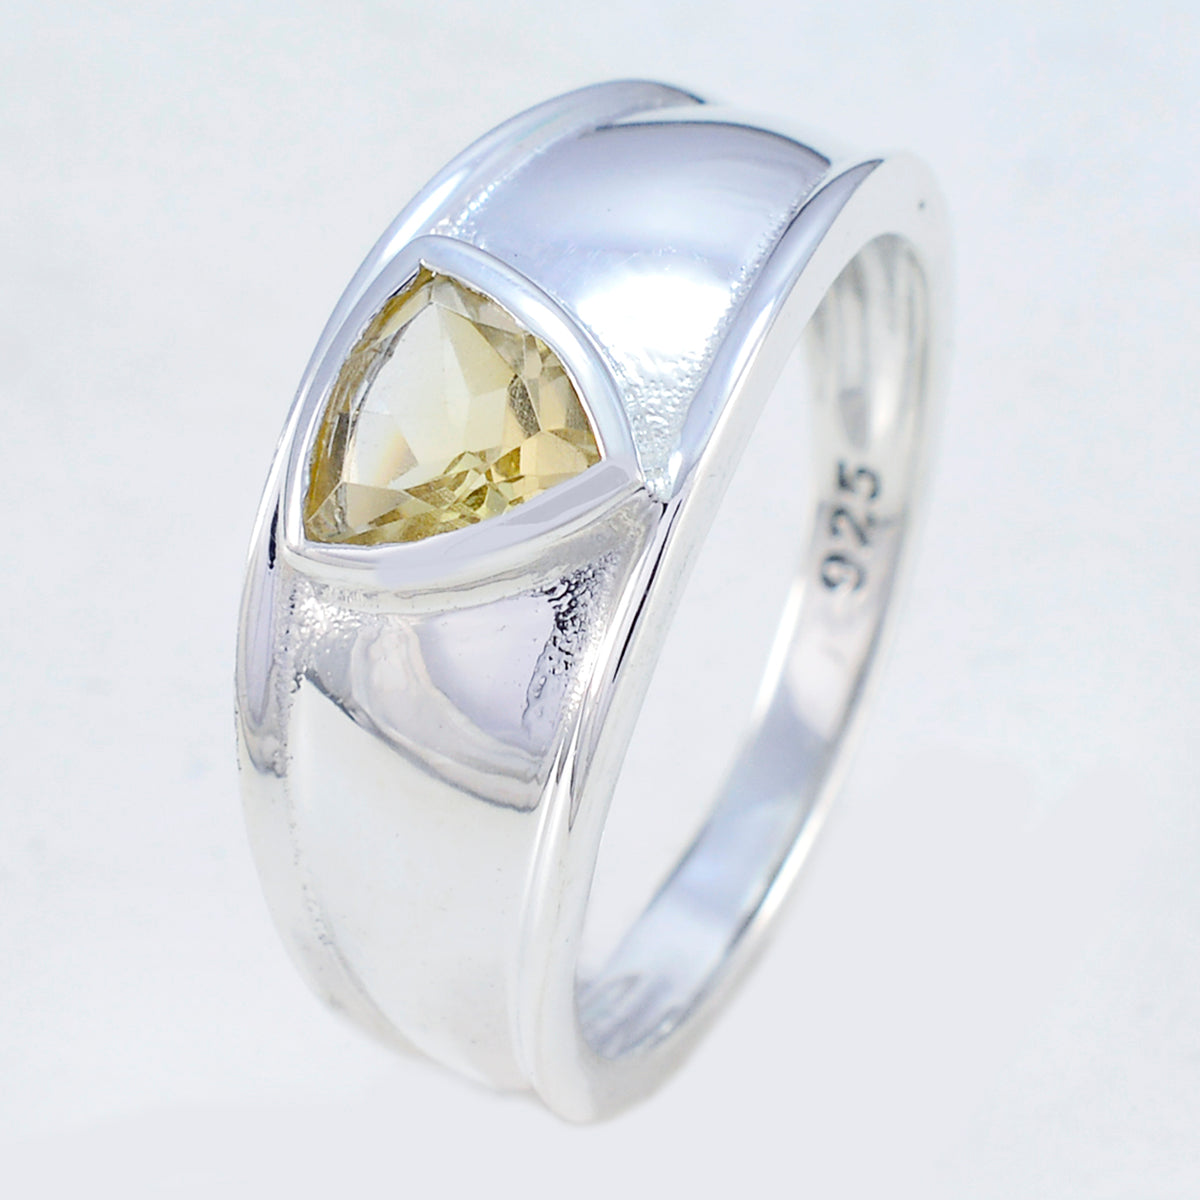 Magnificent Gem Citrine Sterling Silver Rings Wholesale Body Jewelry